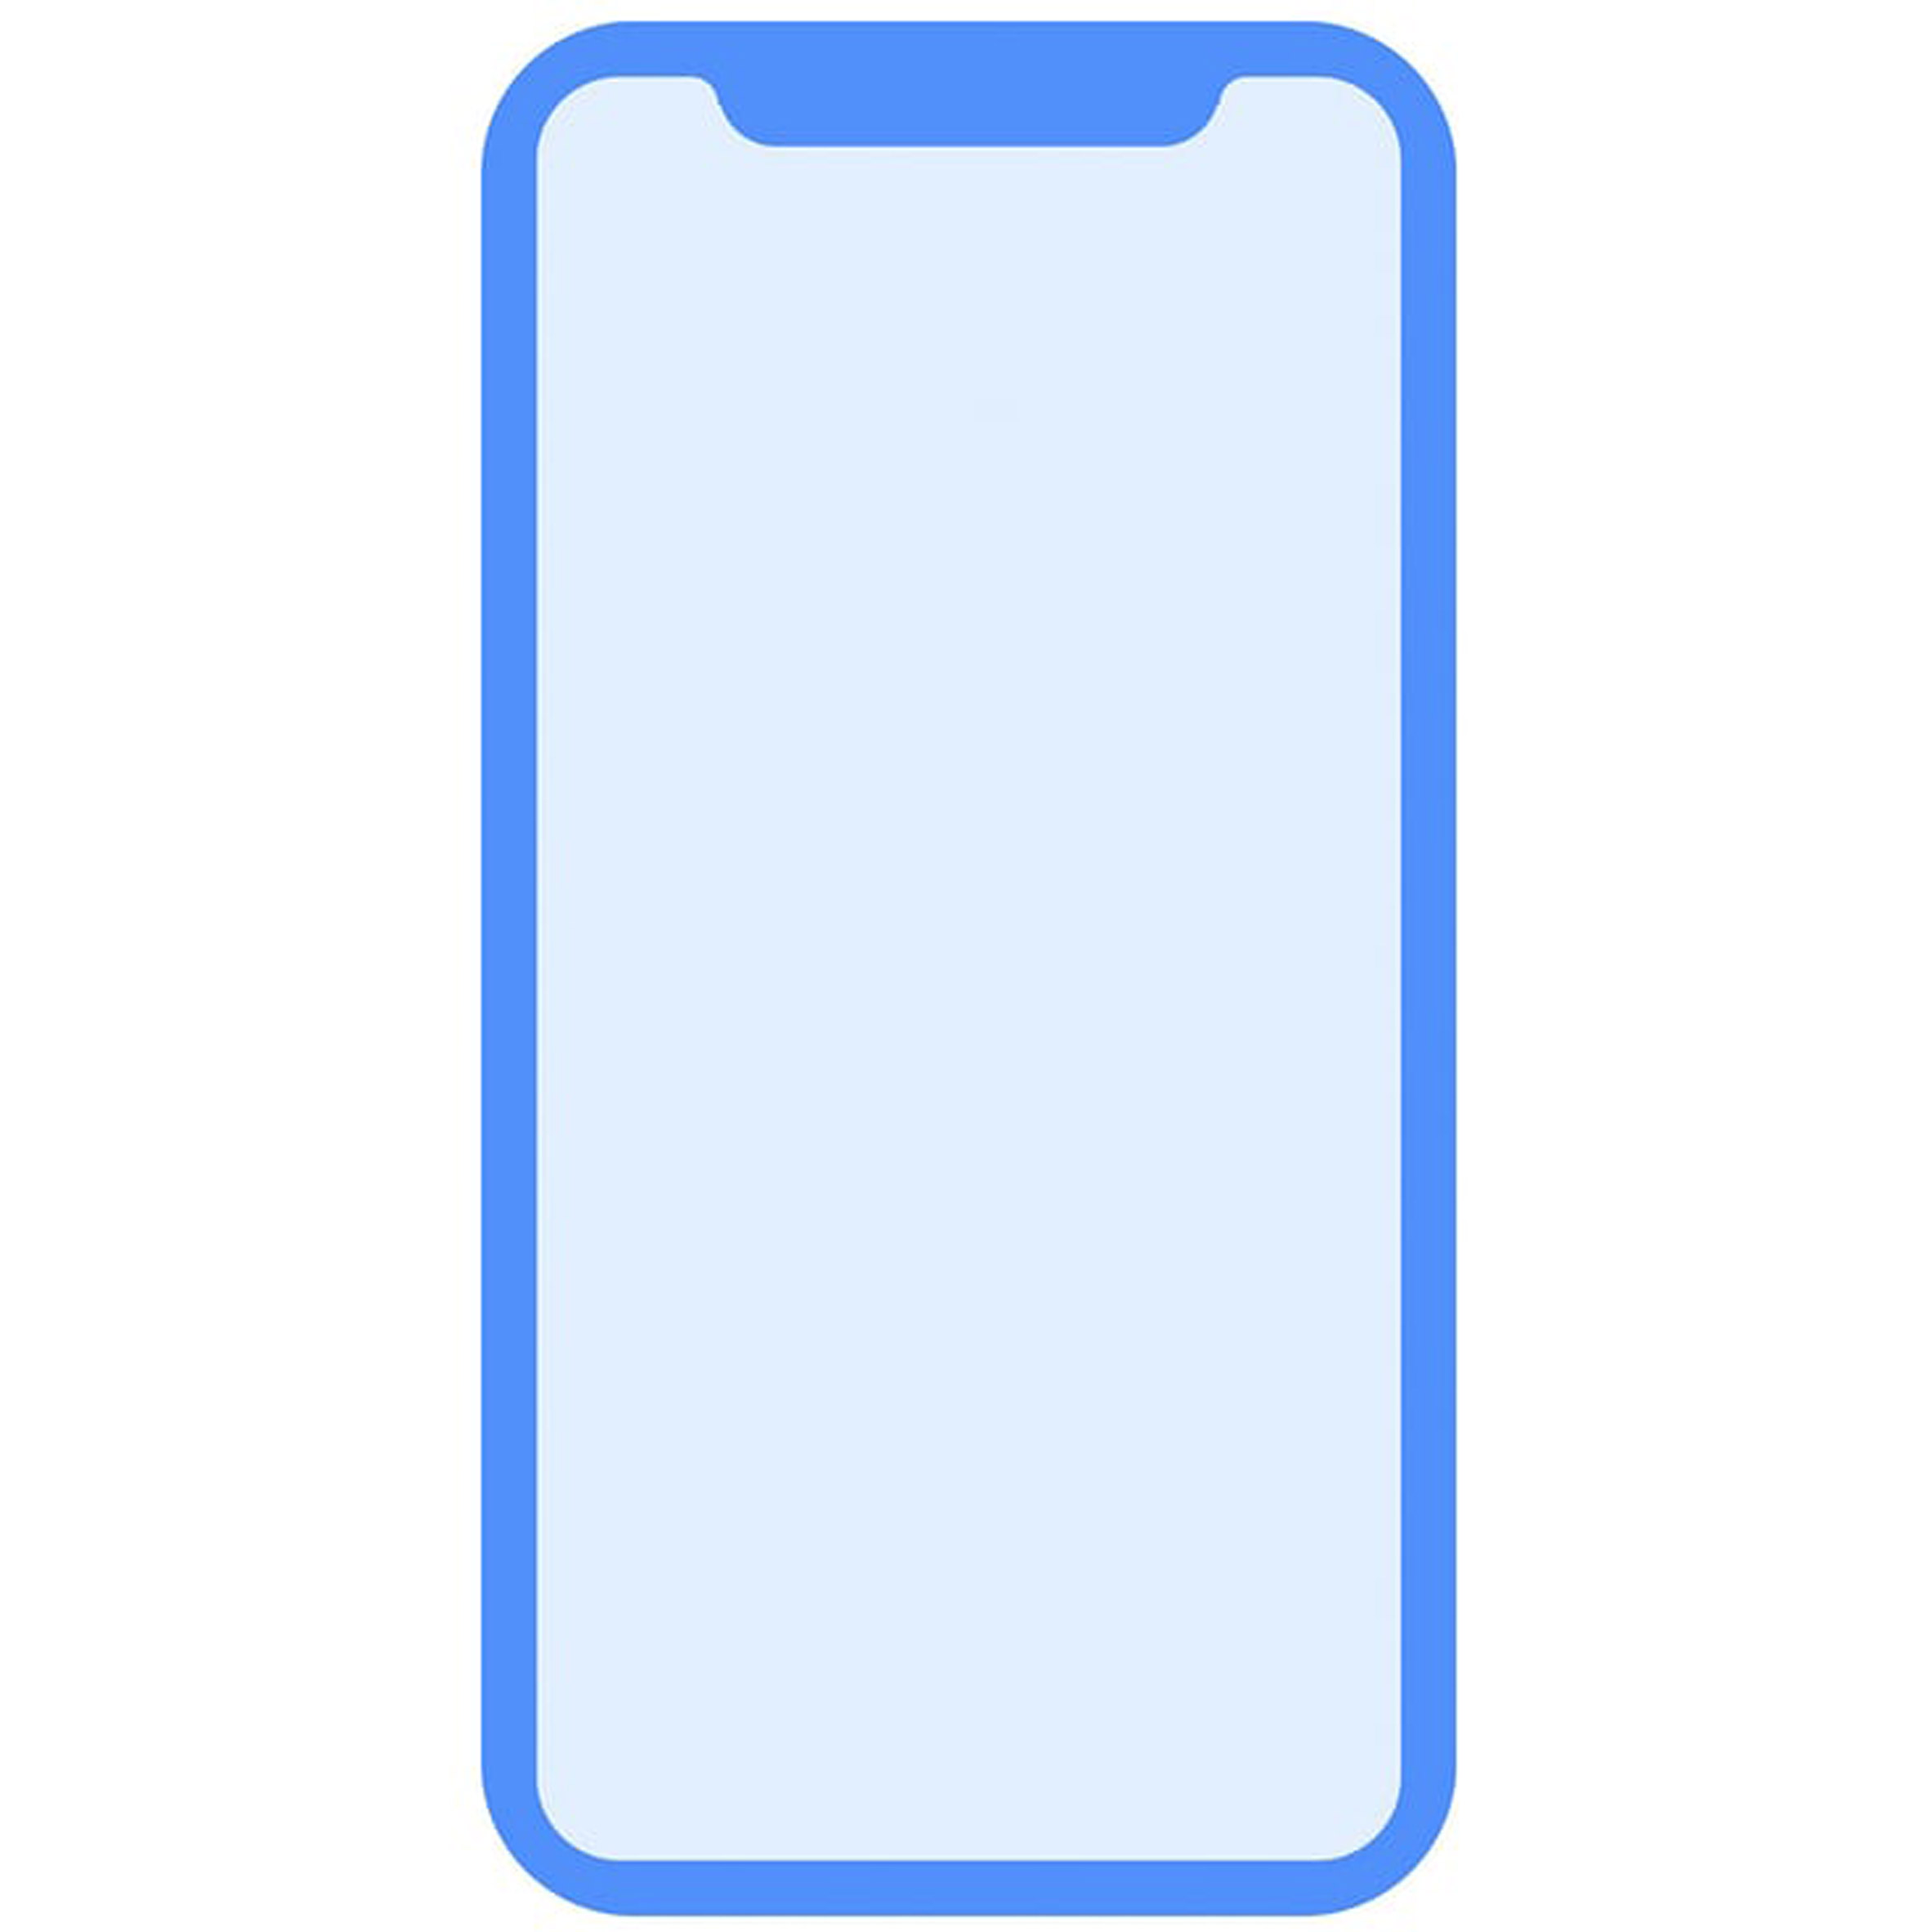 iphone silhouette icon